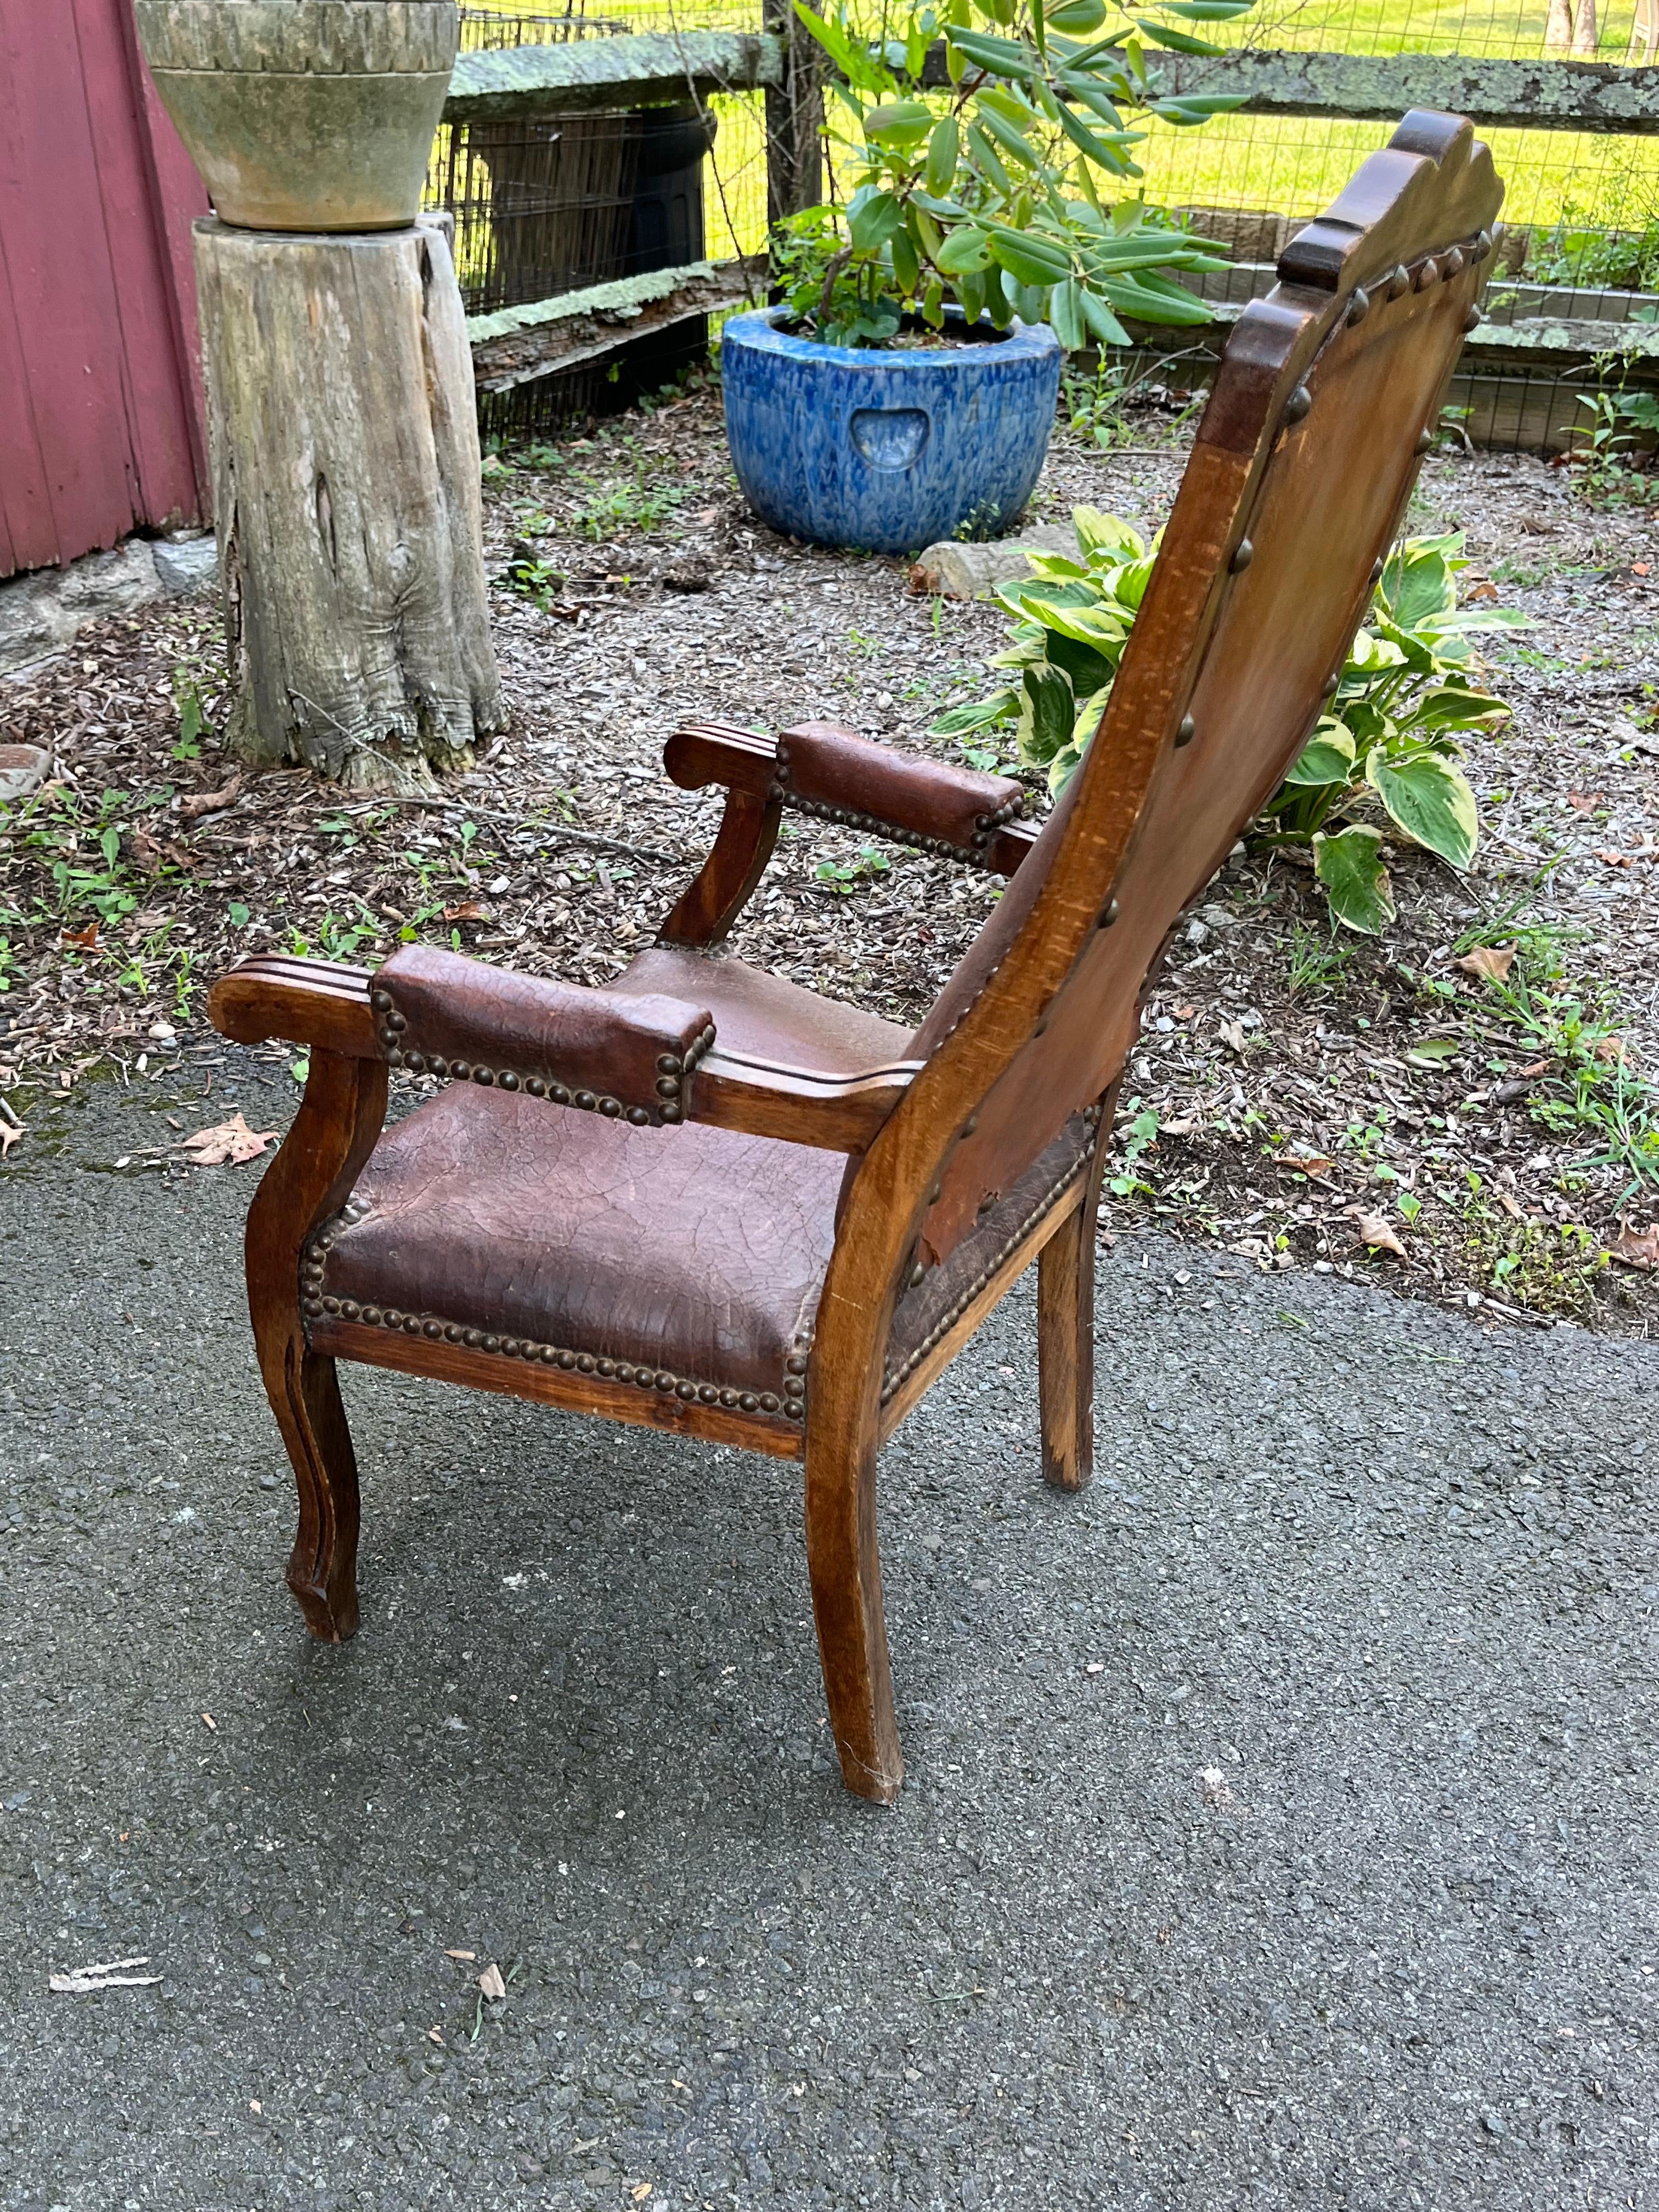 Child’s Size “Voltaire” Chair, 19th Century French For Sale 2